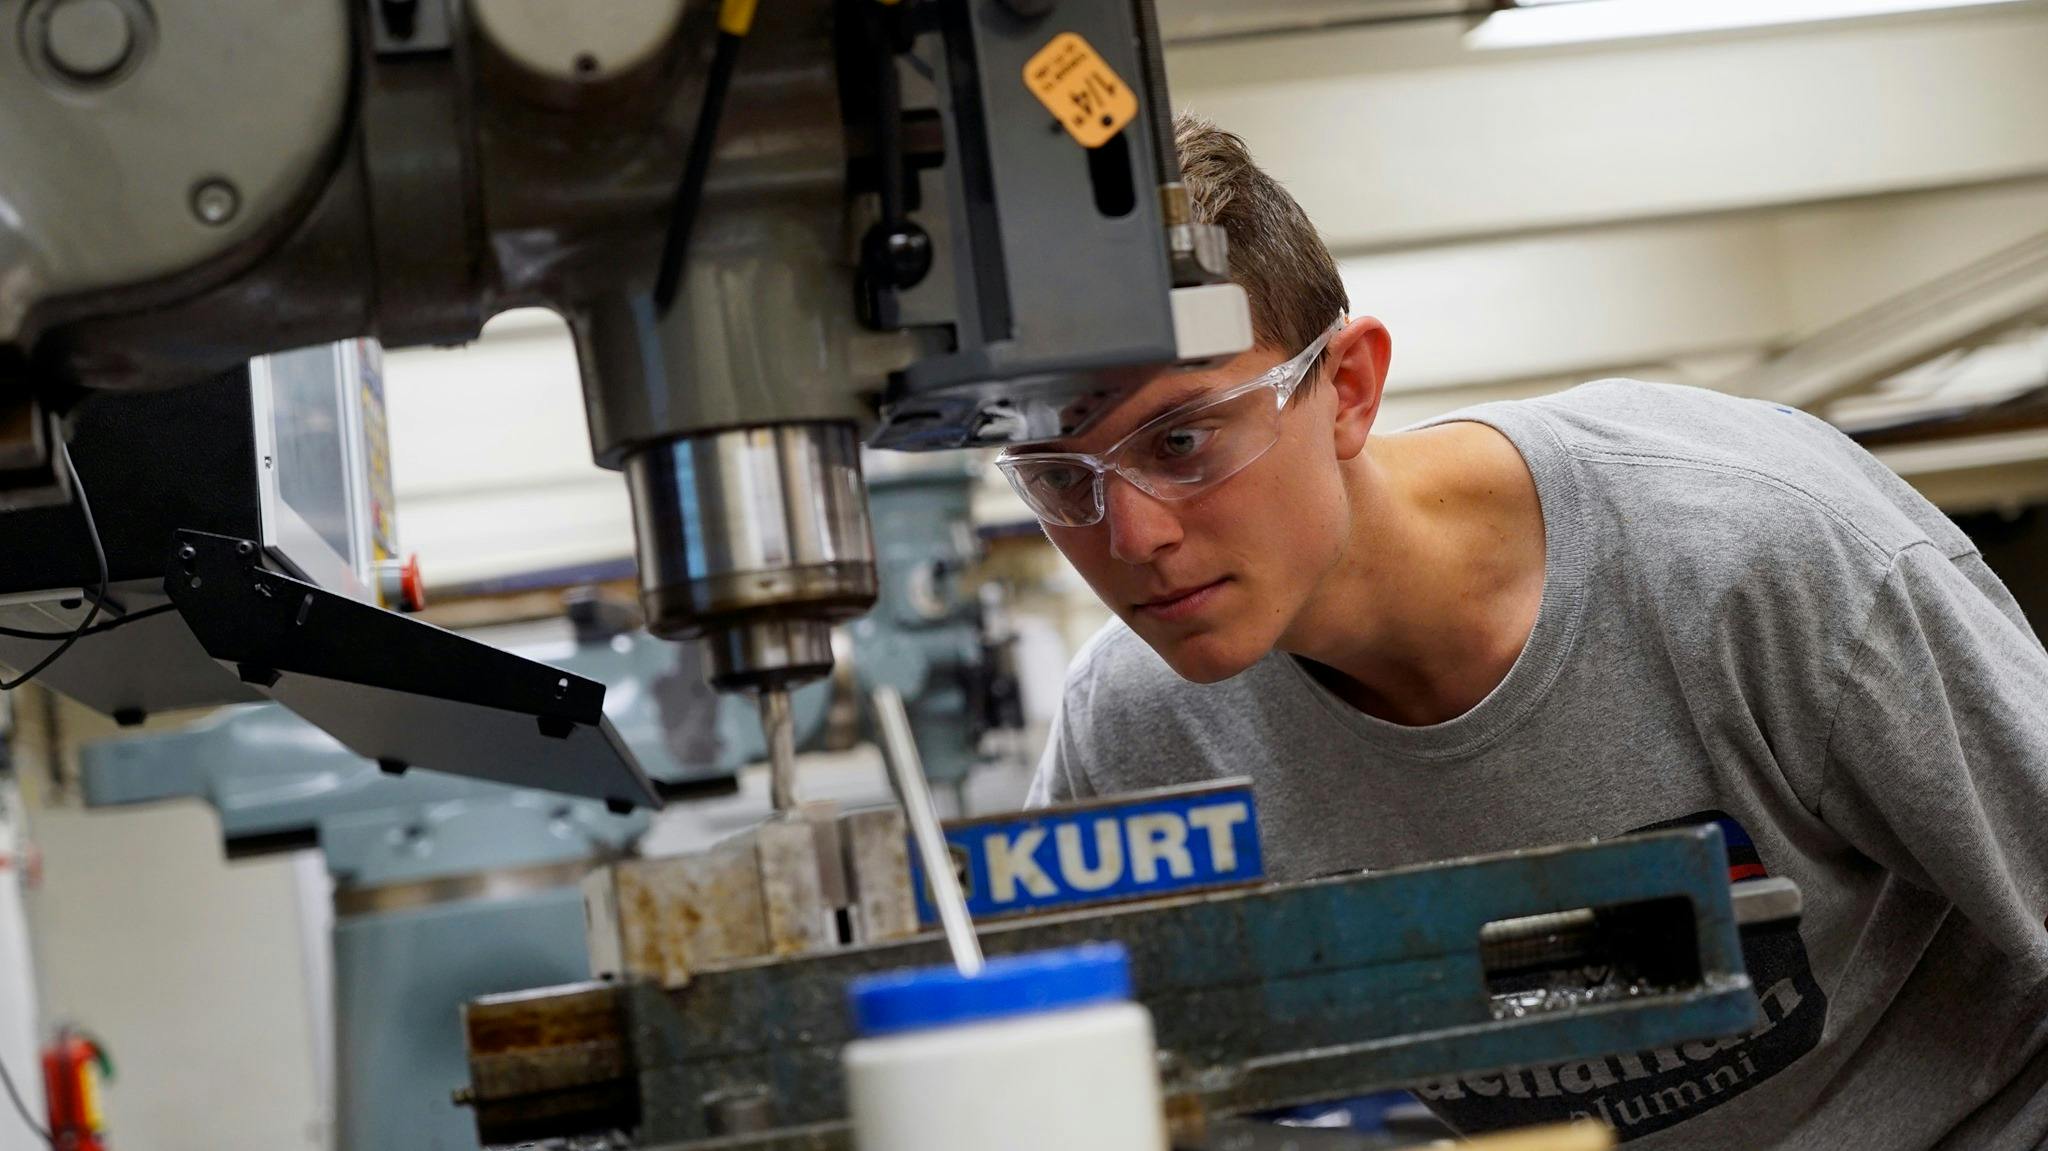 A student at Webb Institute wearing safety glasses and using a drill press.